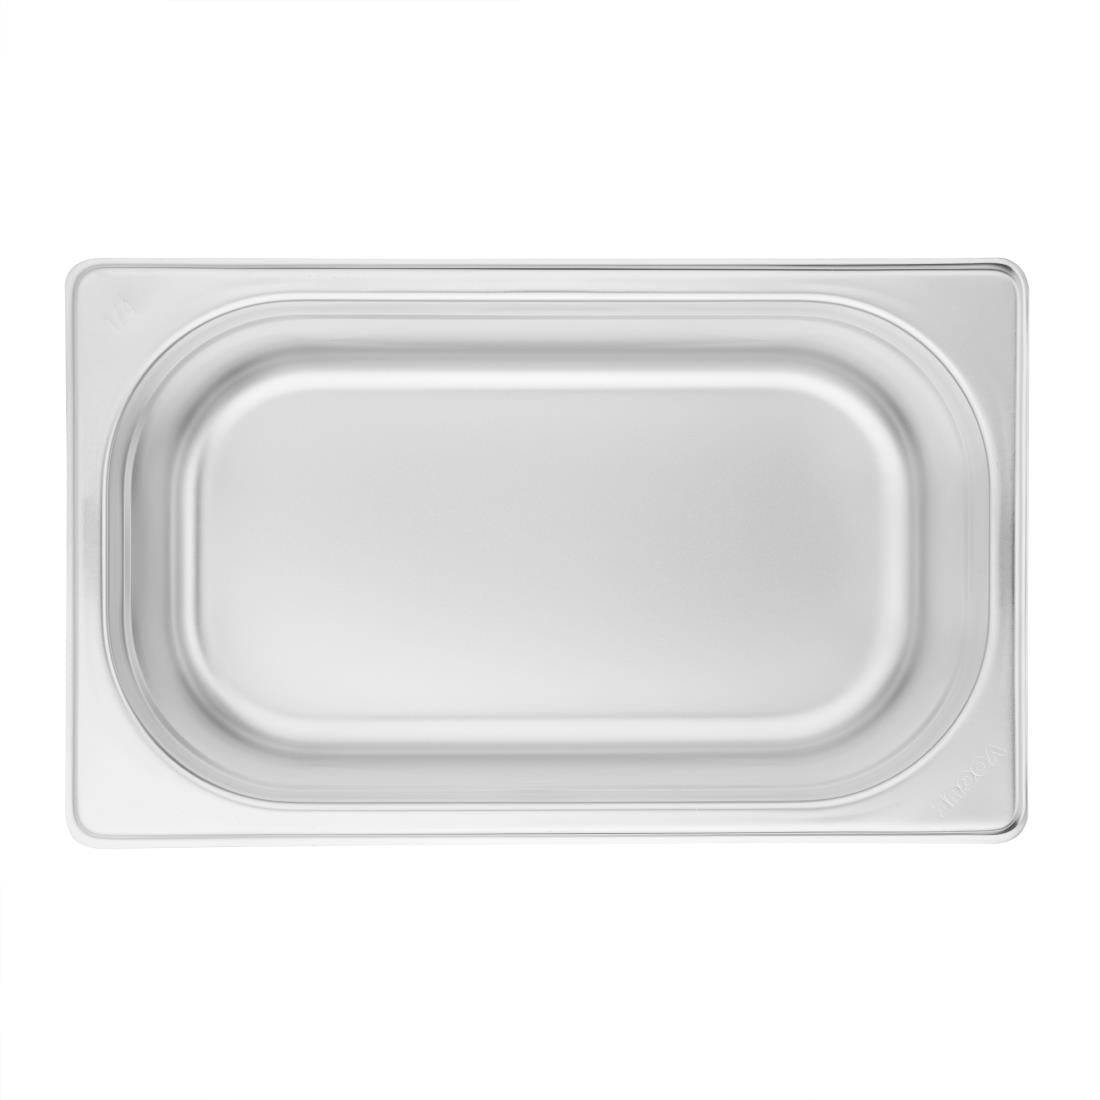 Vogue Stainless Steel 1/4 Gastronorm Pan 100mm